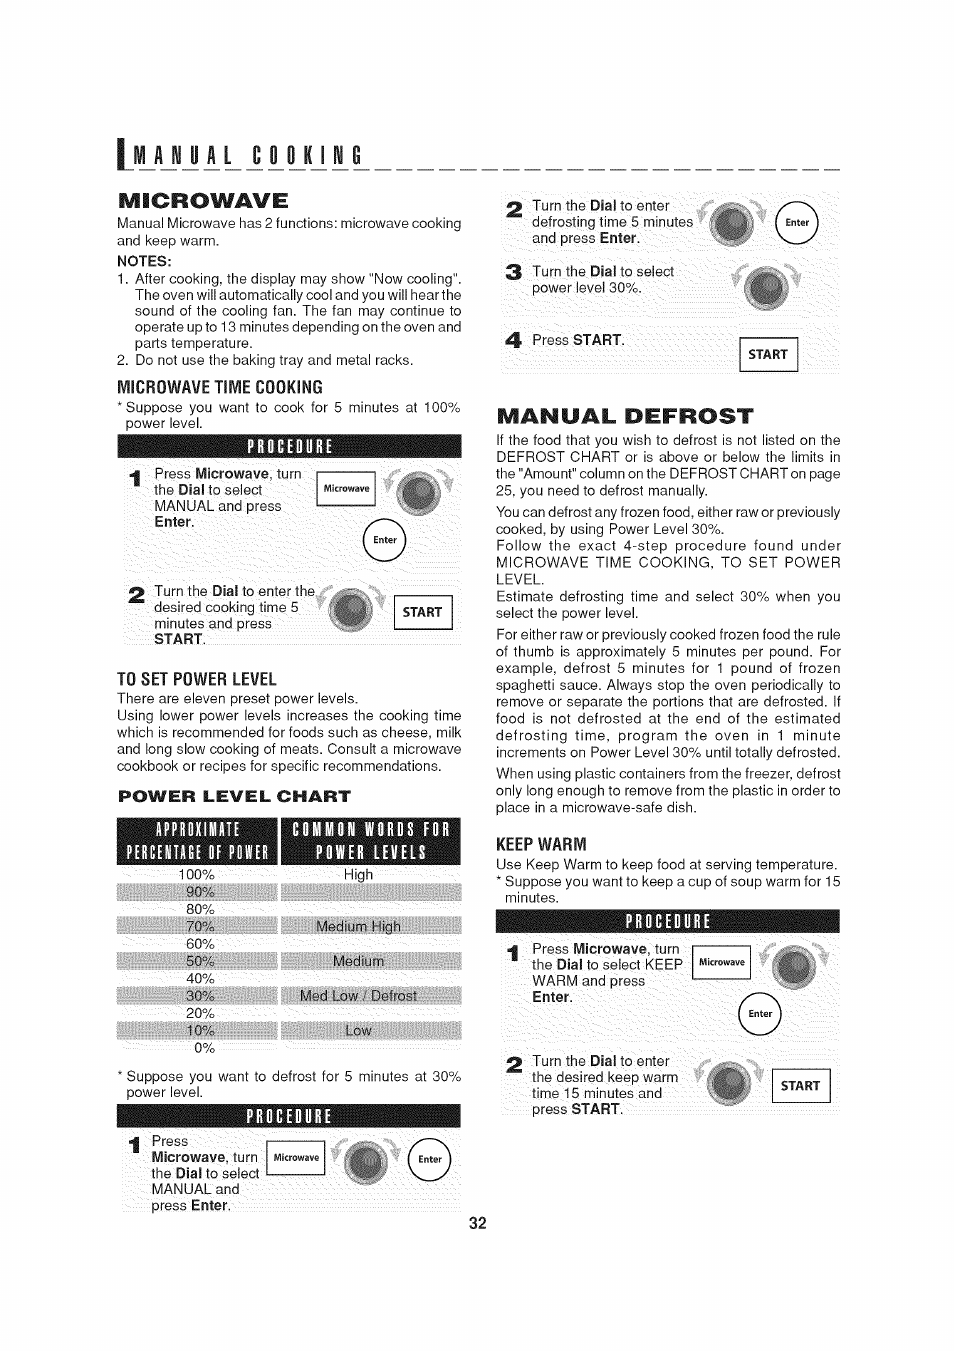 Microwave, Microwave time cooking, Prflceoure | To set power level, Procedure, Manual defrost, Keep warm, L«lajjilliyim | Sharp AX-1200 User Manual | Page 34 / 43